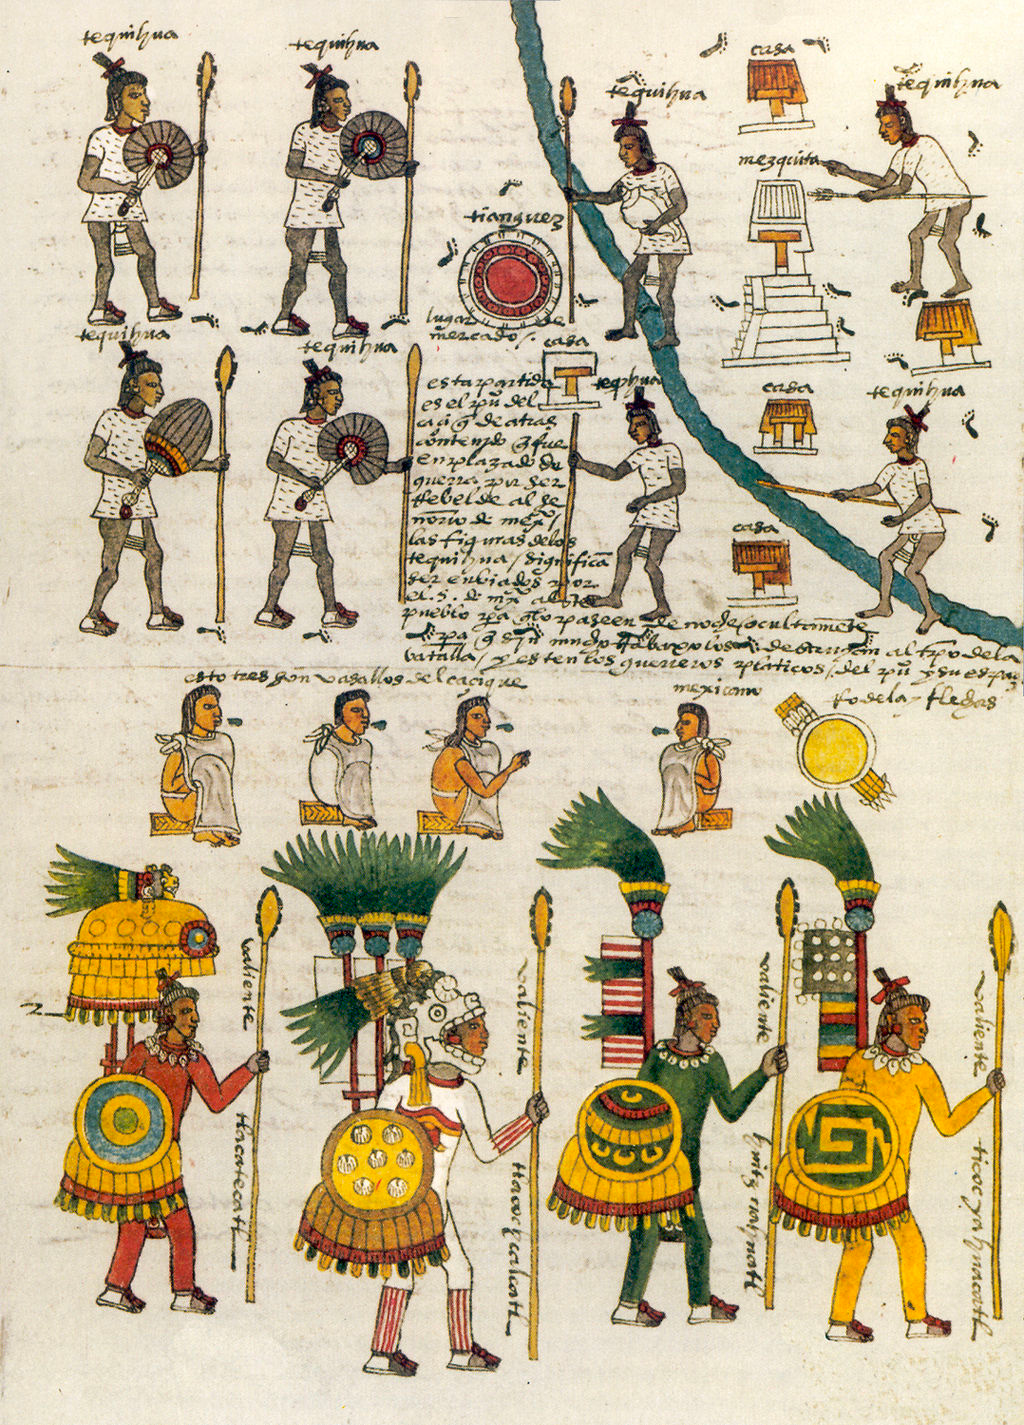 Page from the <a href="https://en.wikipedia.org/wiki/Codex_Mendoza">Codex Mendoza</a> depicting warriors wearing ichcahuipilli and tlahuiztli suits. Wikimedia Commons.